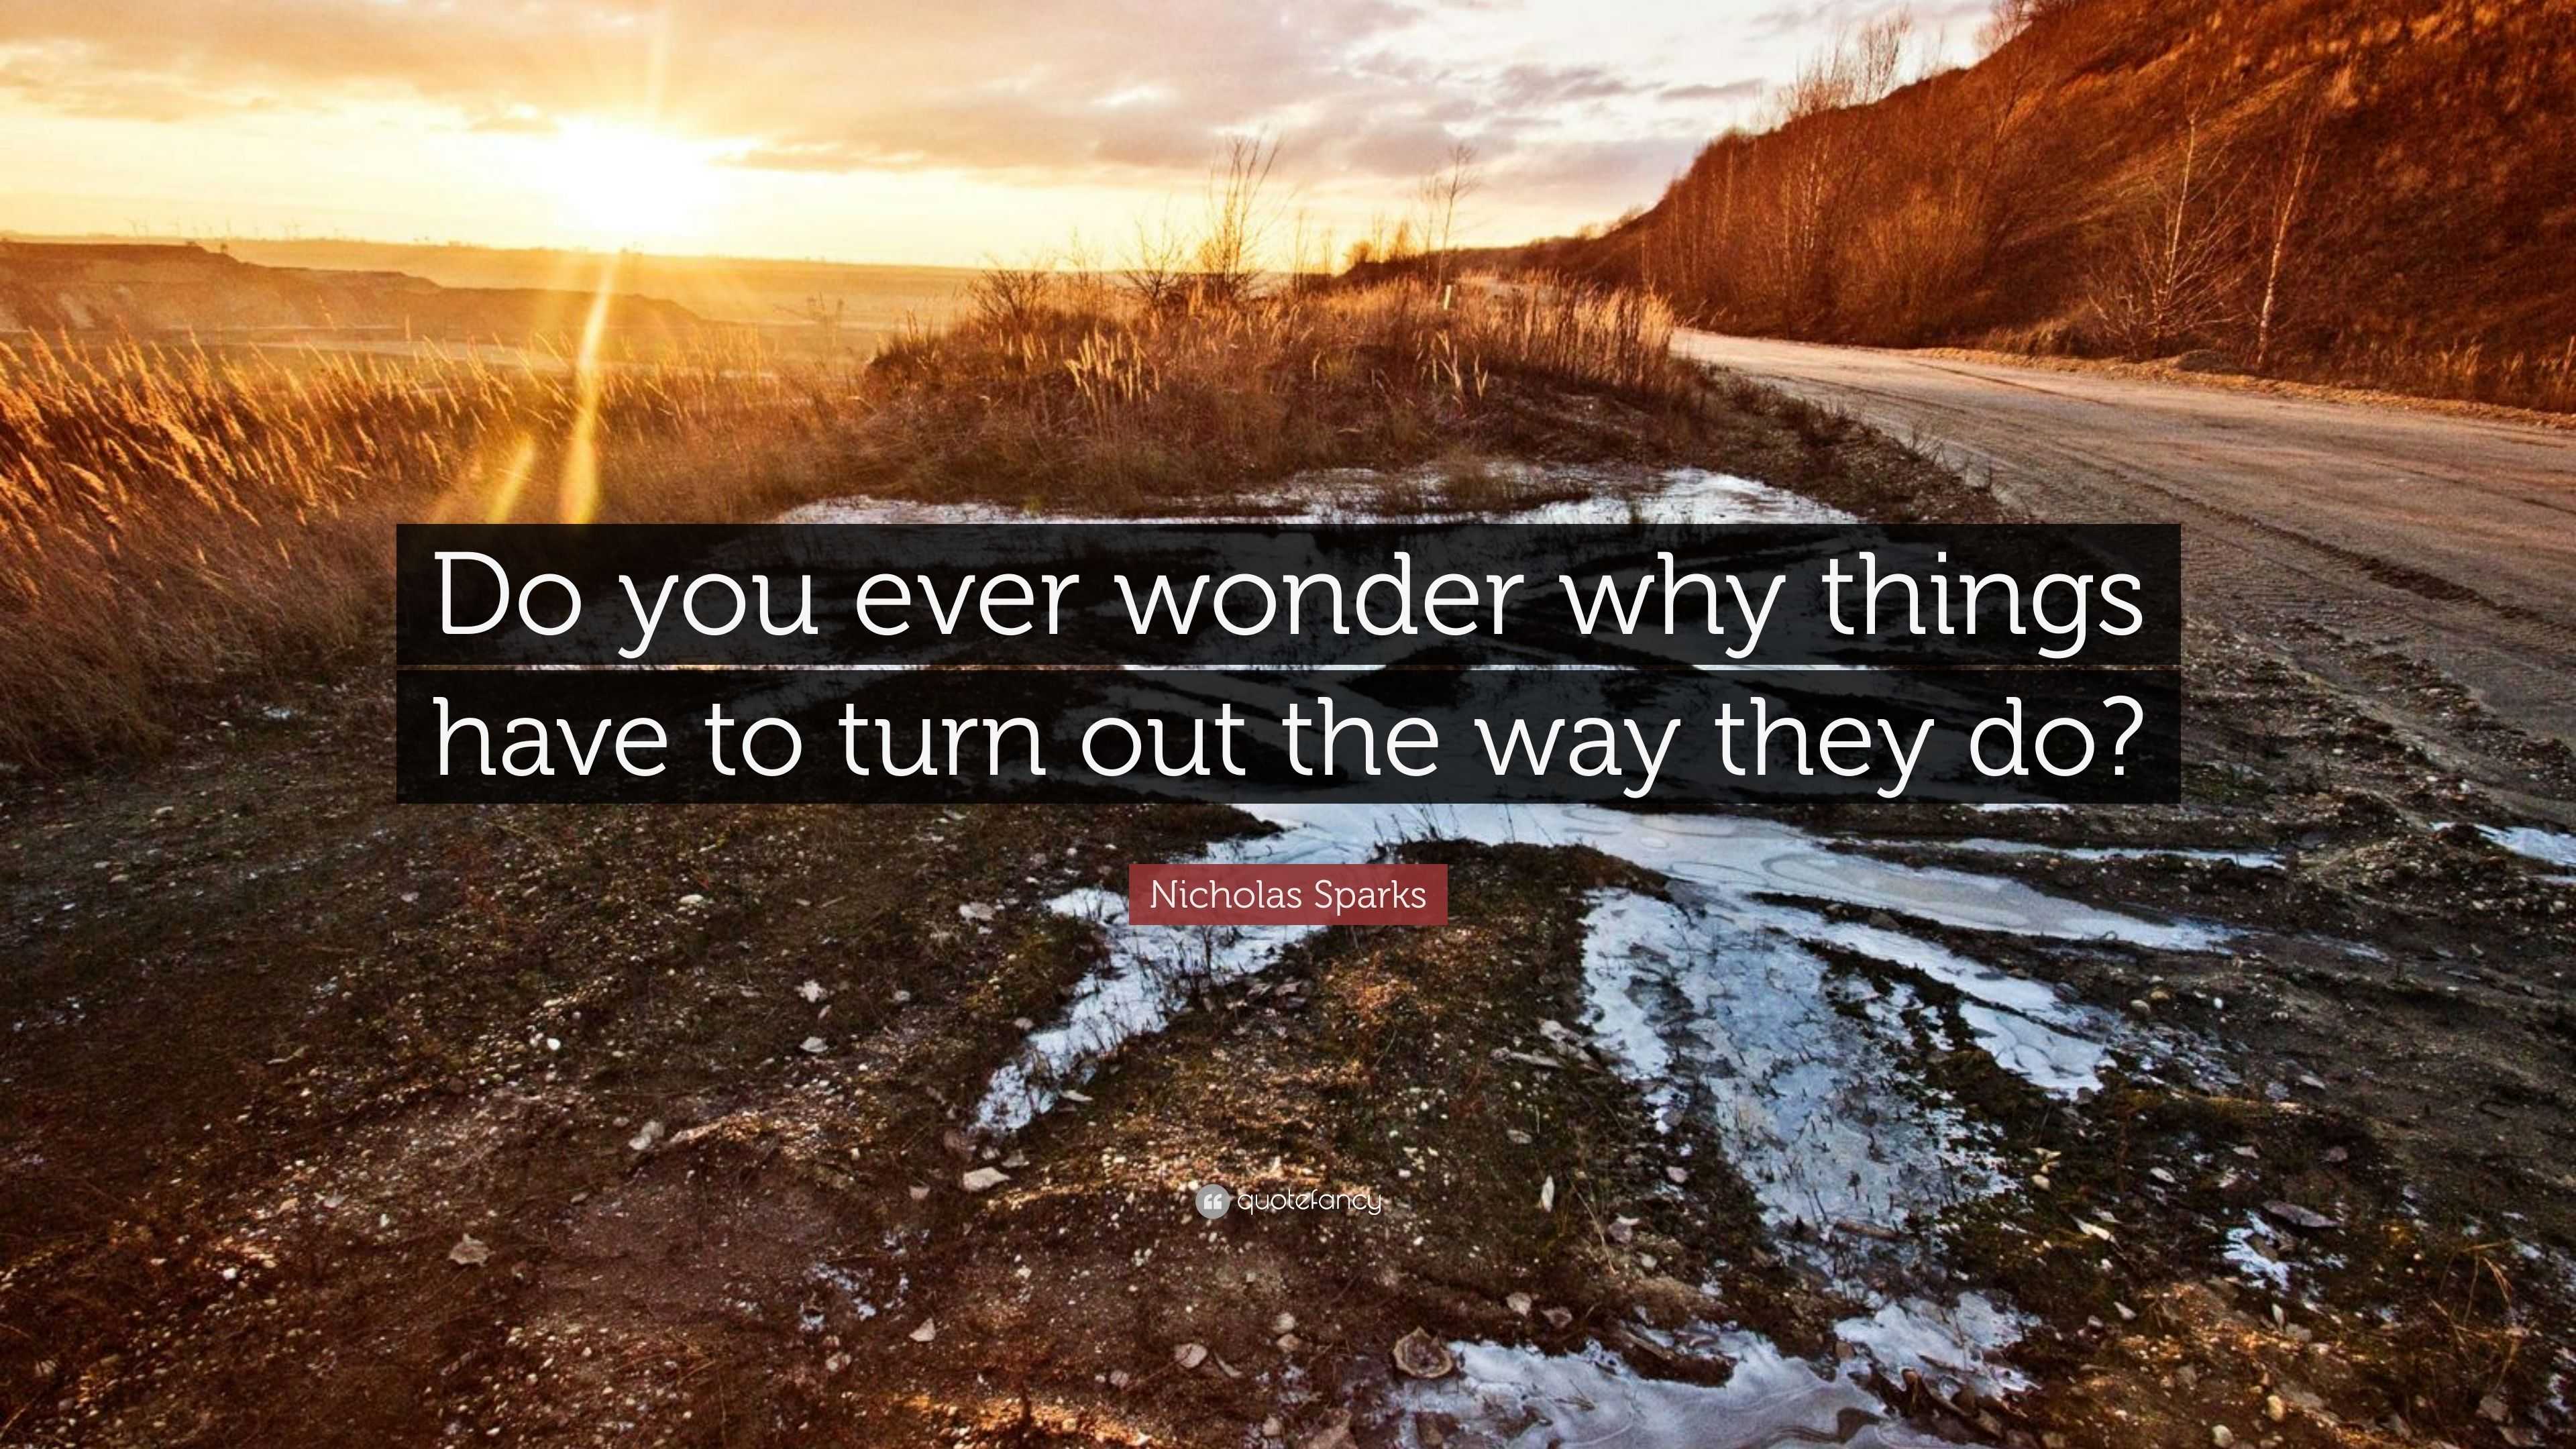 Nicholas Sparks Quote “do You Ever Wonder Why Things Have To Turn Out The Way They Do” 